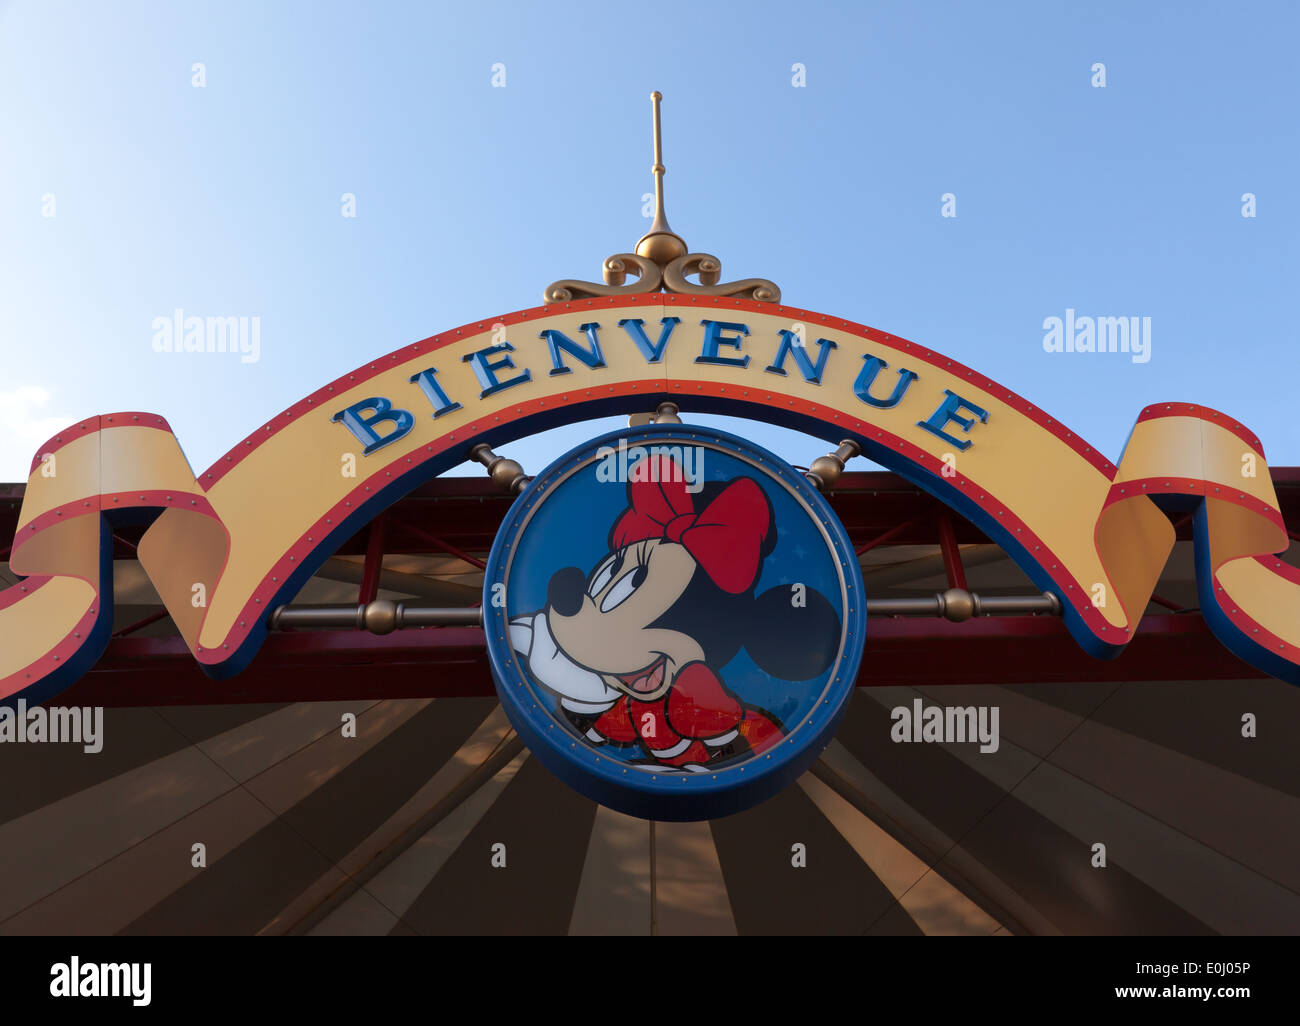 Welcome sign at the entrance of Disney Land Paris Stock Photo